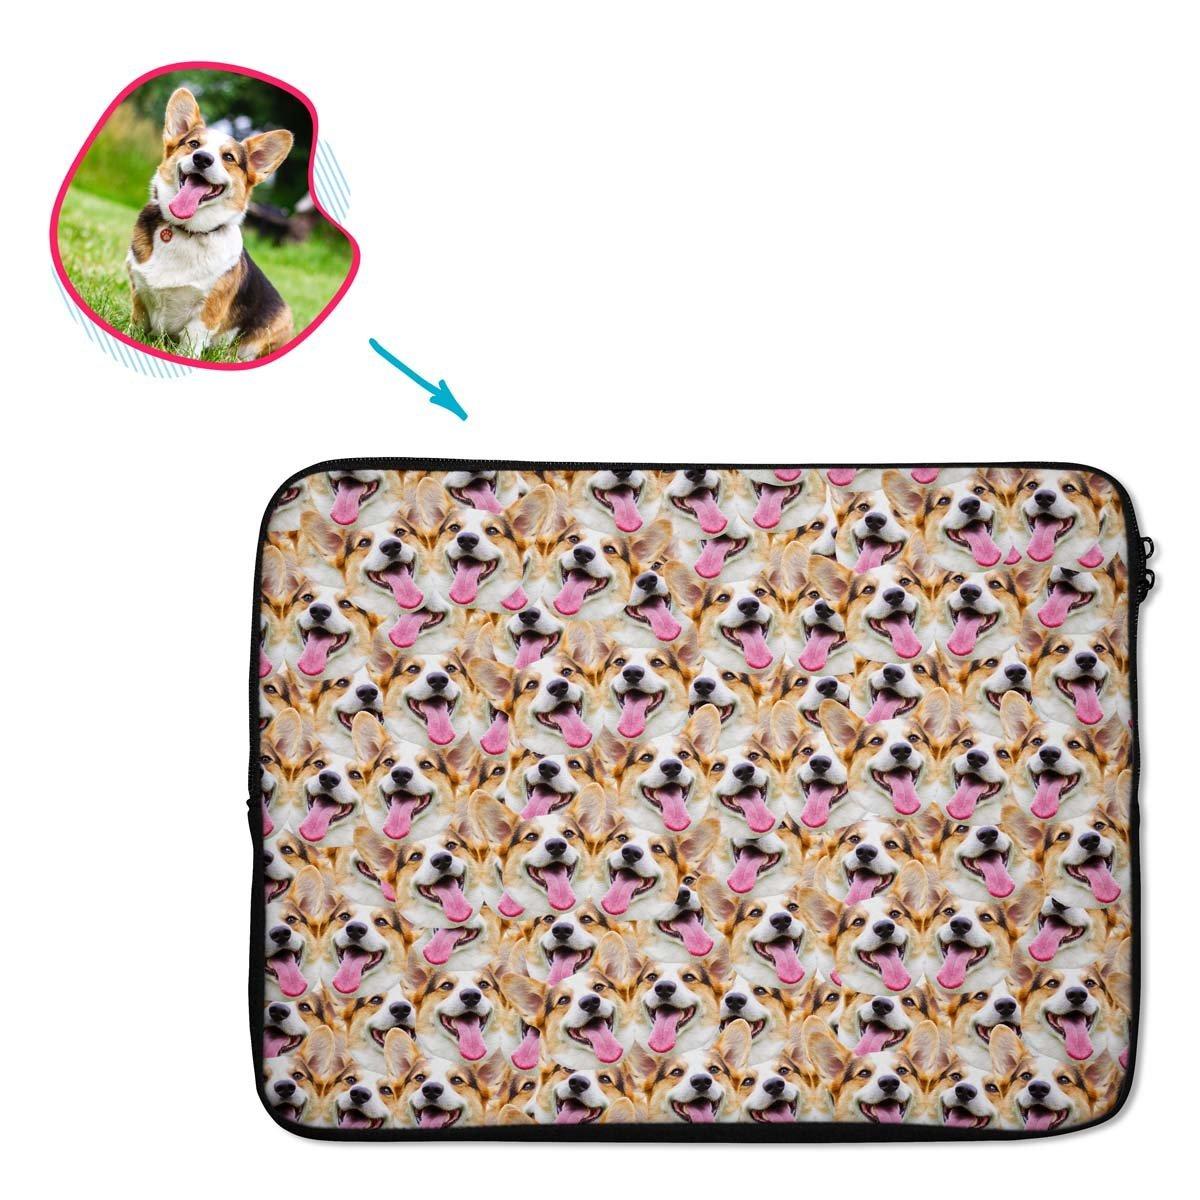 Dog Mash laptop sleeve personalized with photo of face printed on them